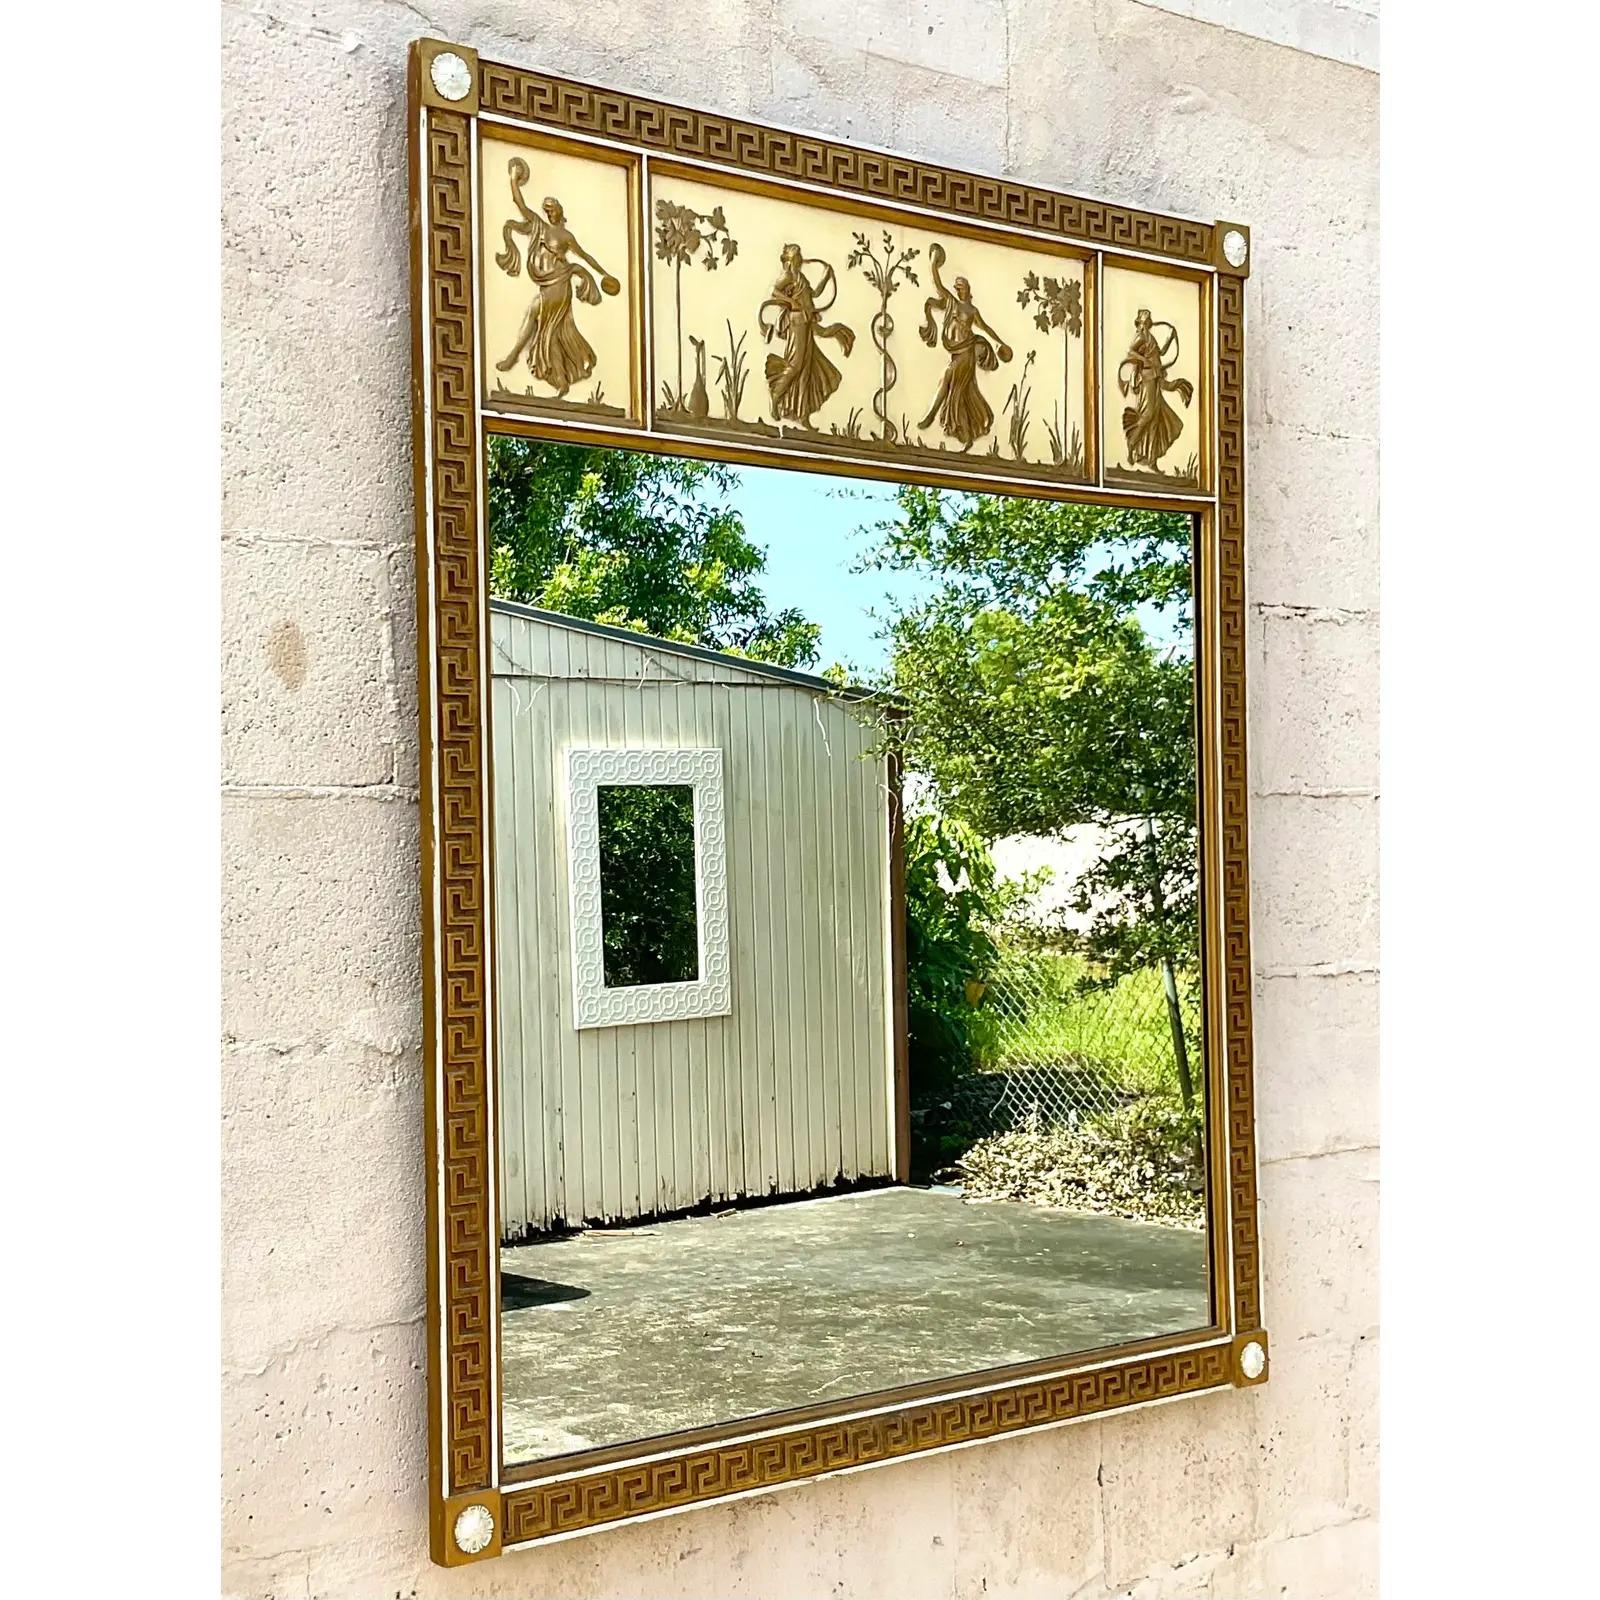 Fantastic vintage Regency wall mirror. Beautiful Greek Key design with dancing figures across the top. A real showstopper. Chic gilt finish on an ivory back ground. Acquired from a Palm Beach estate.